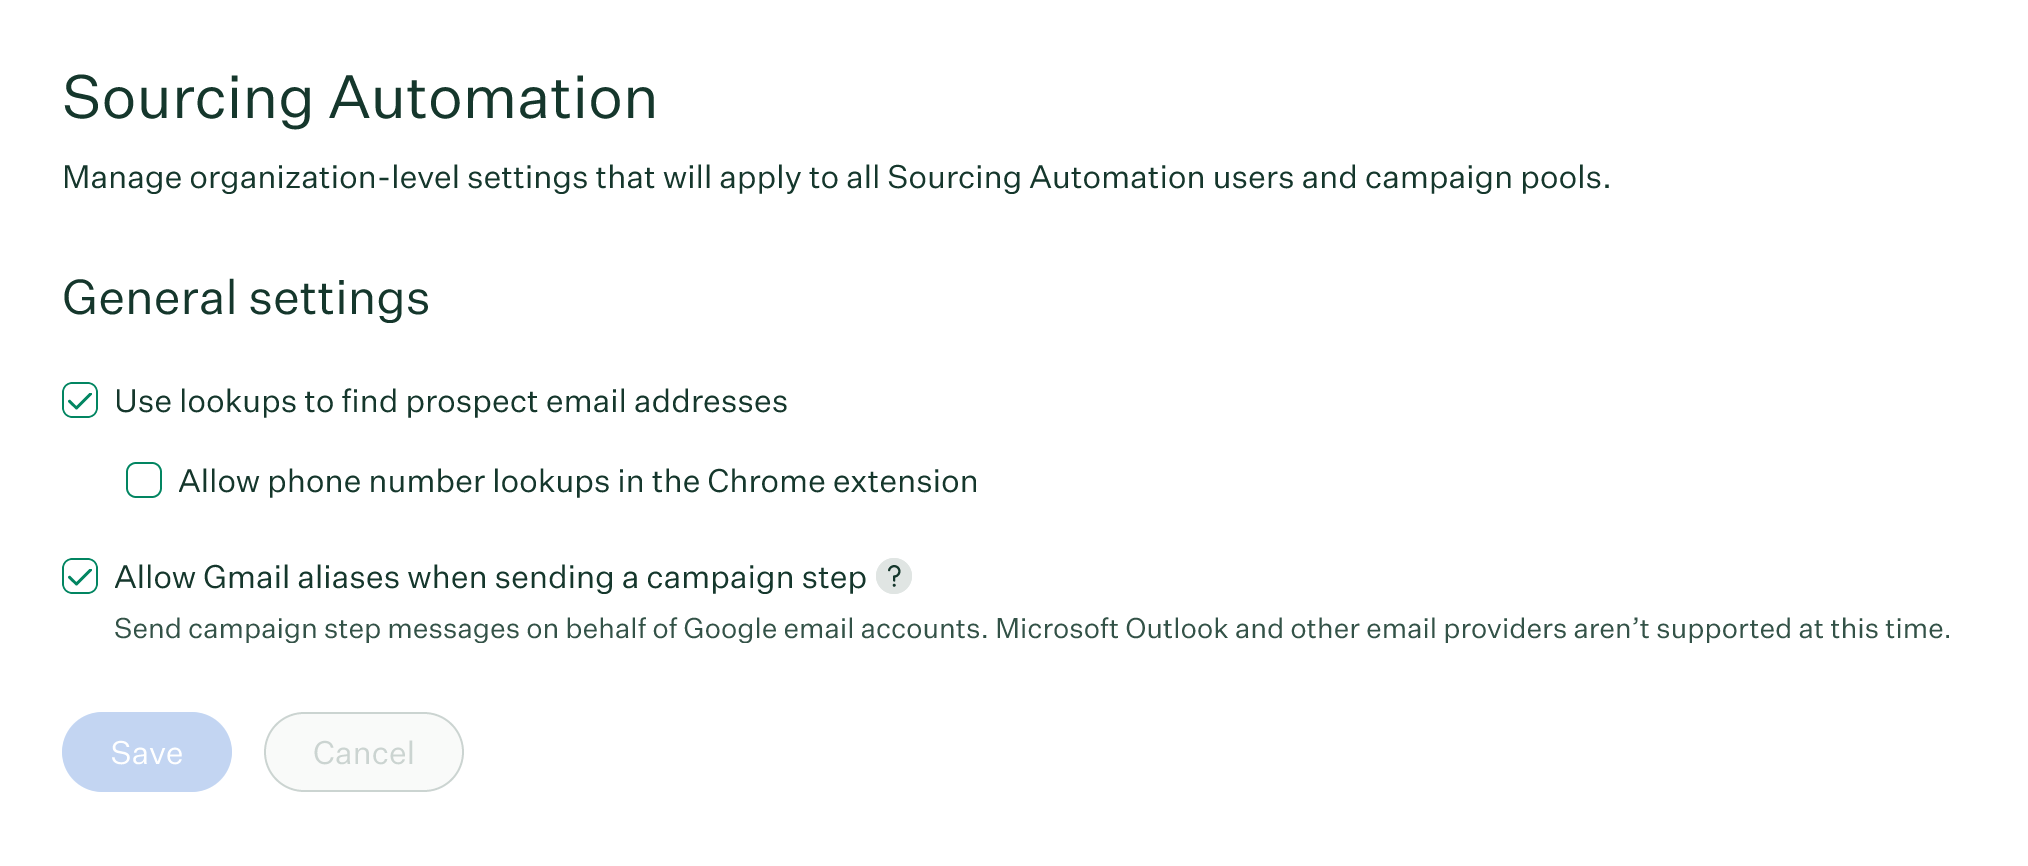 Sourcing Automation page in Configure with General settings displayed